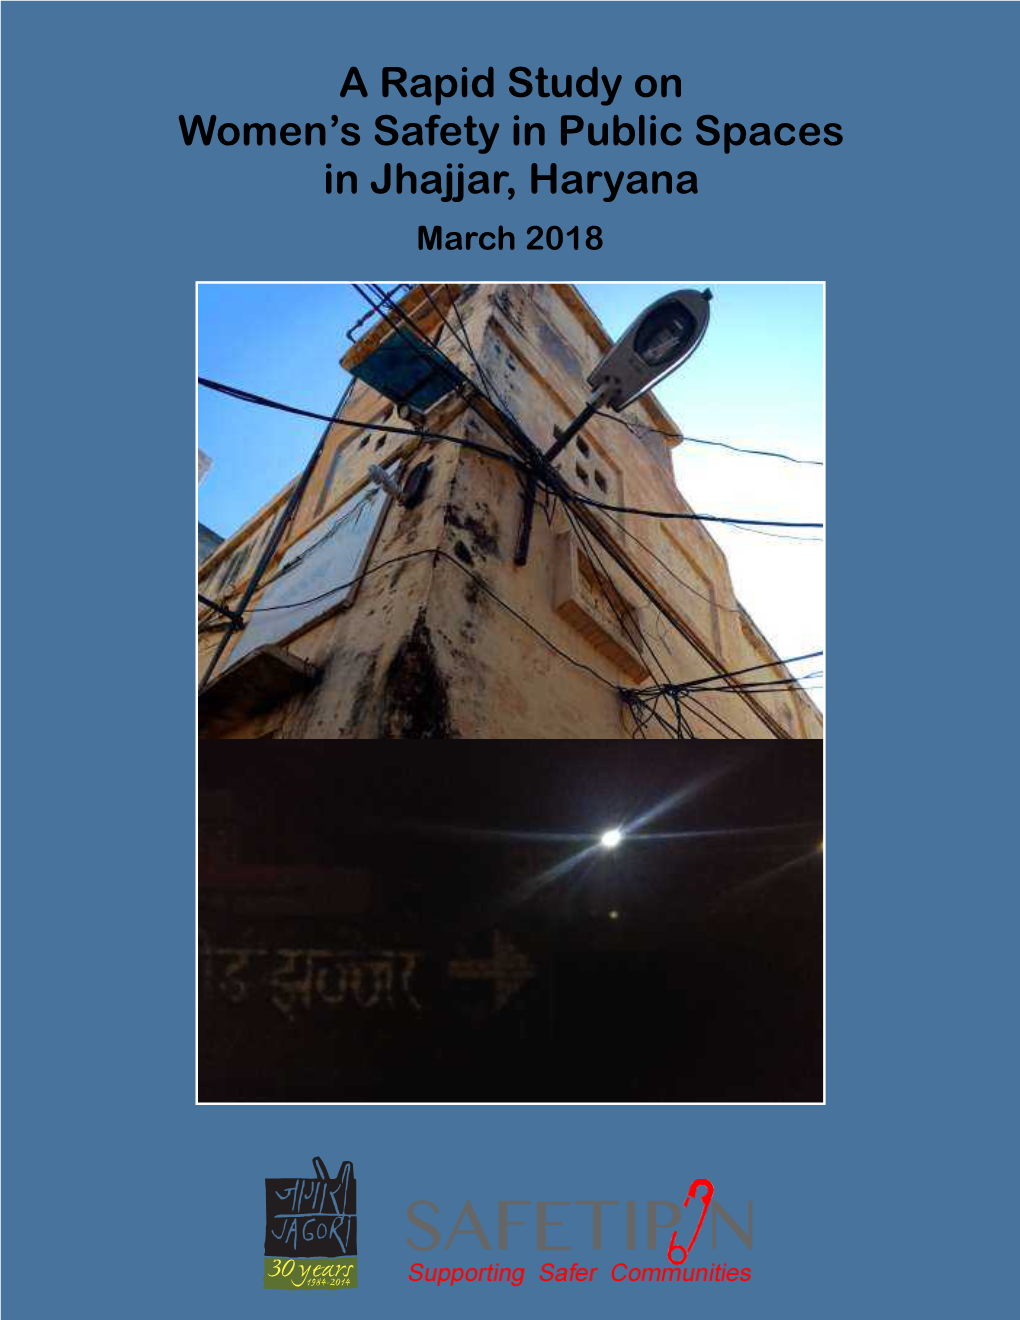 A Rapid Study on Women's Safety in Public Spaces in Jhajjar, Haryana